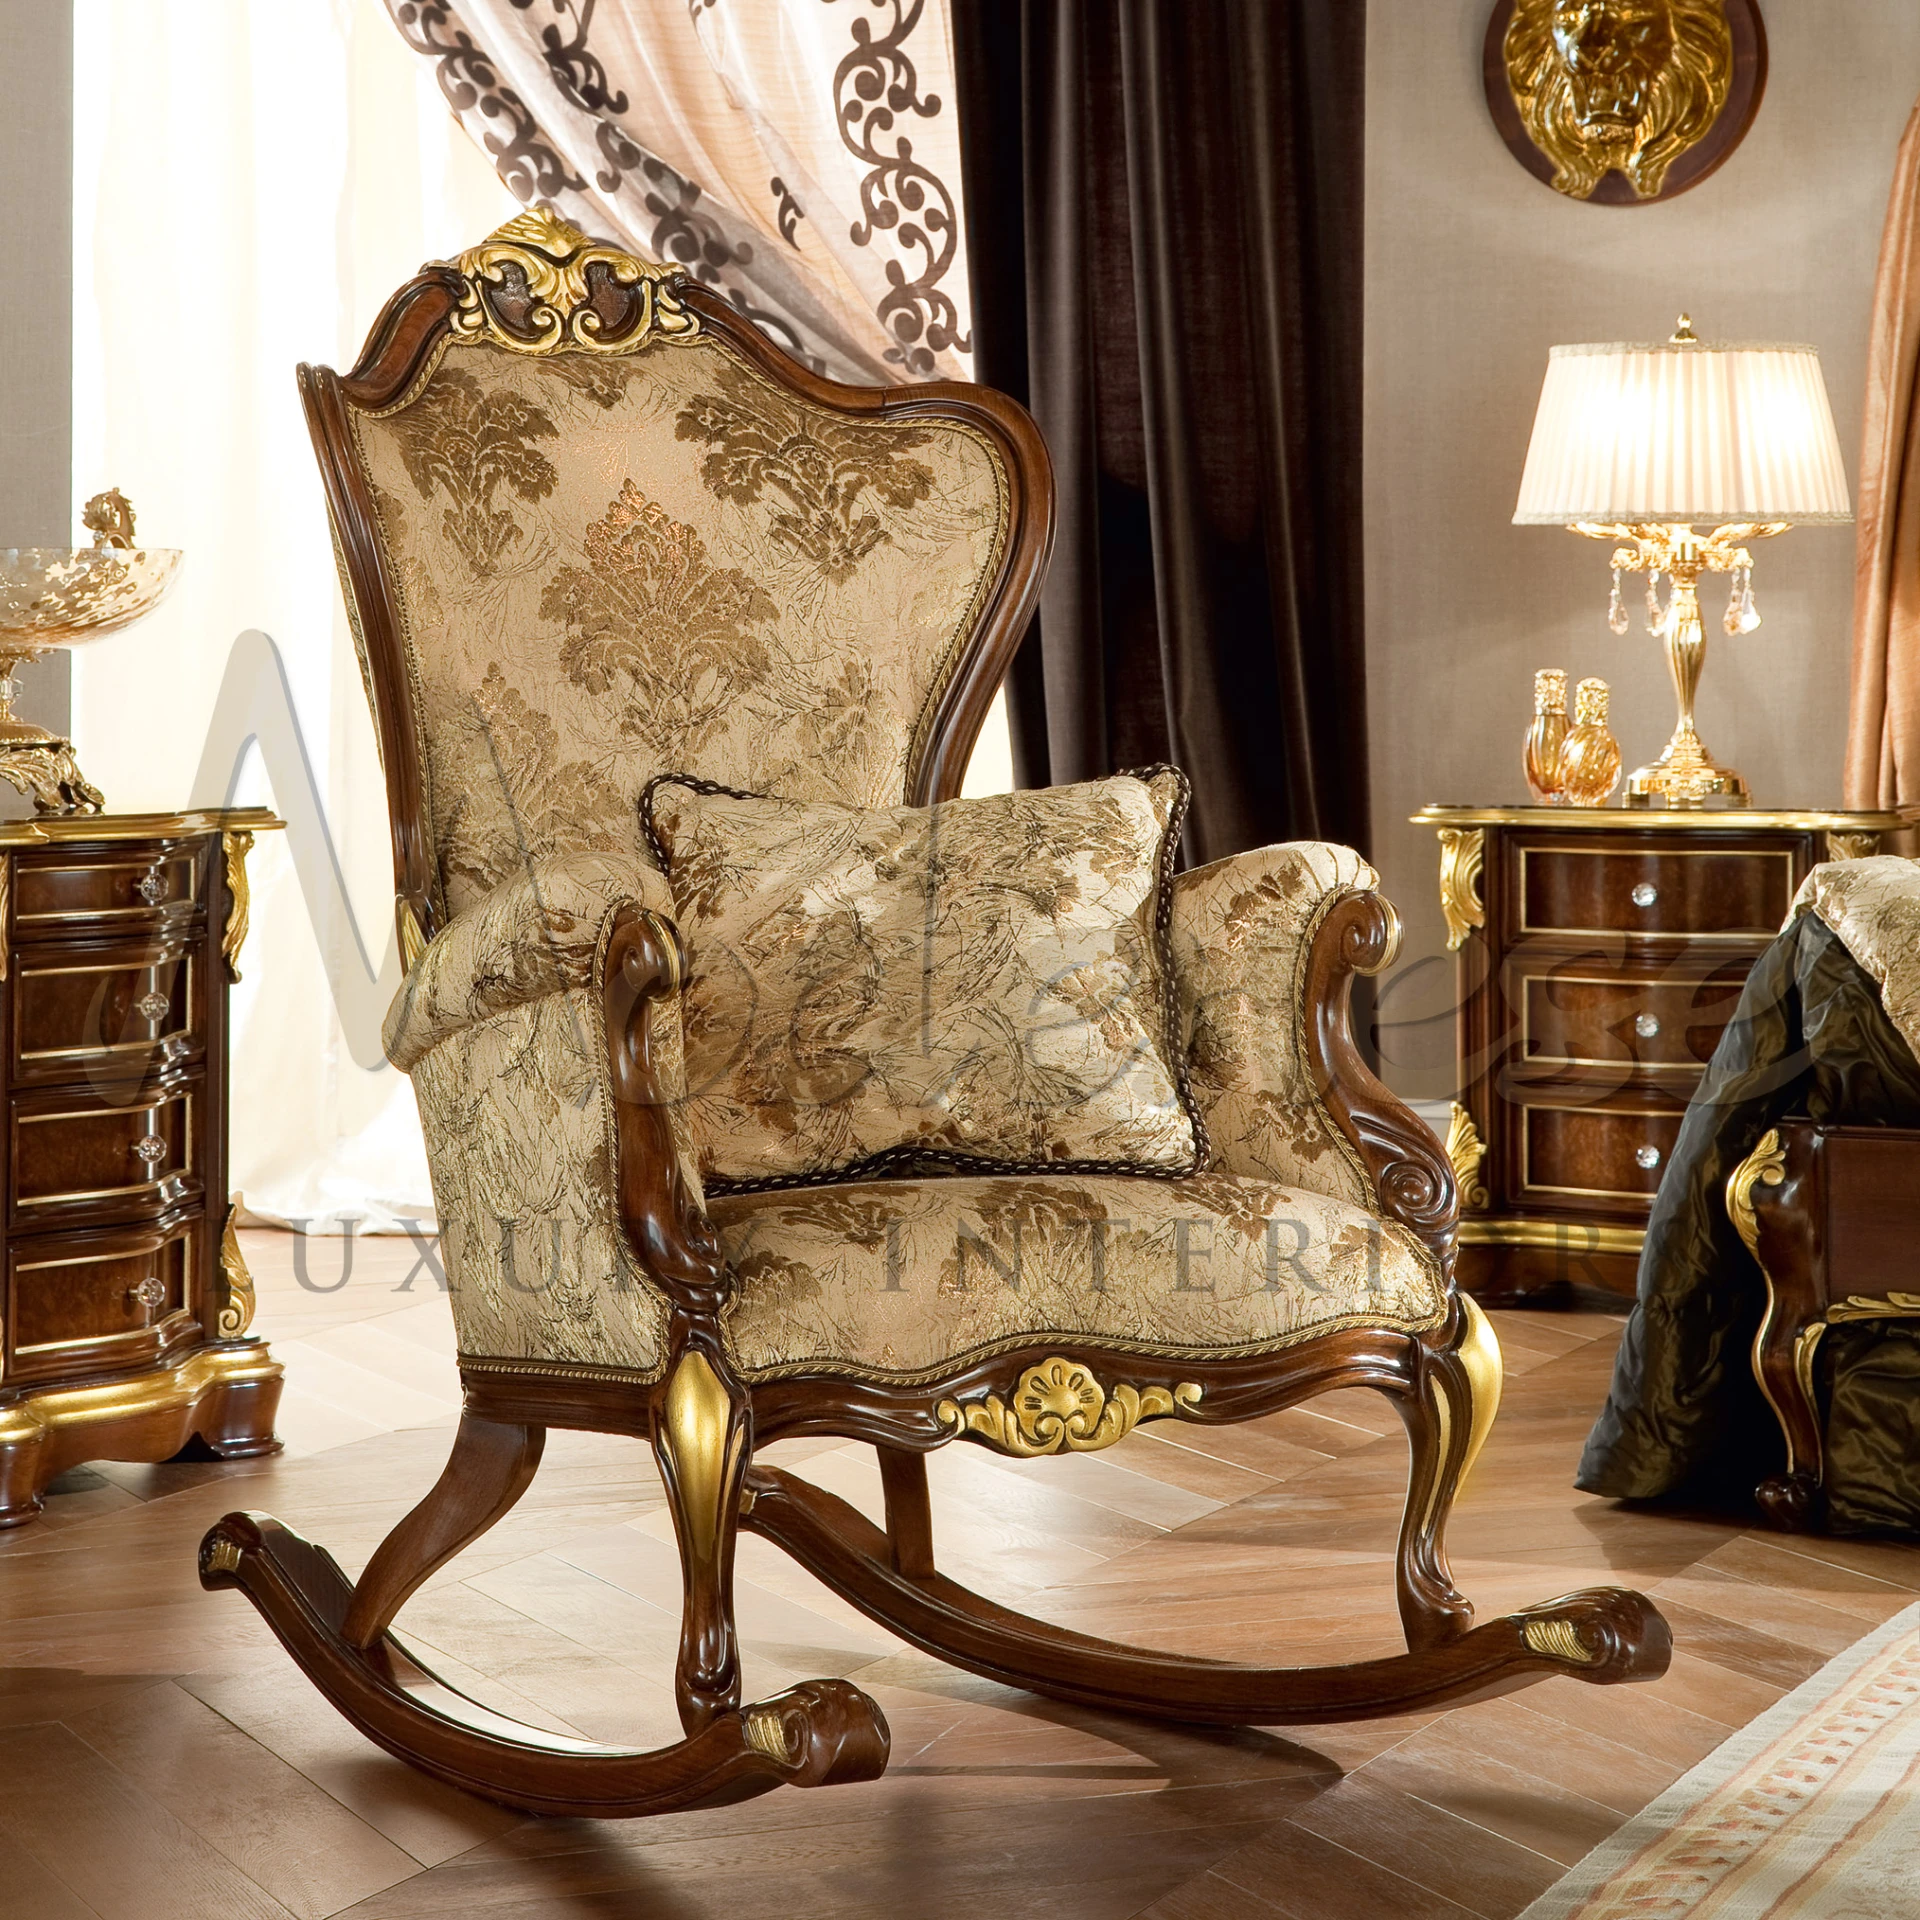 Ornately carved wooden rocking chair with golden upholstery and floral patterns, featuring a cushioned seat, backrest, and a decorative top crest.